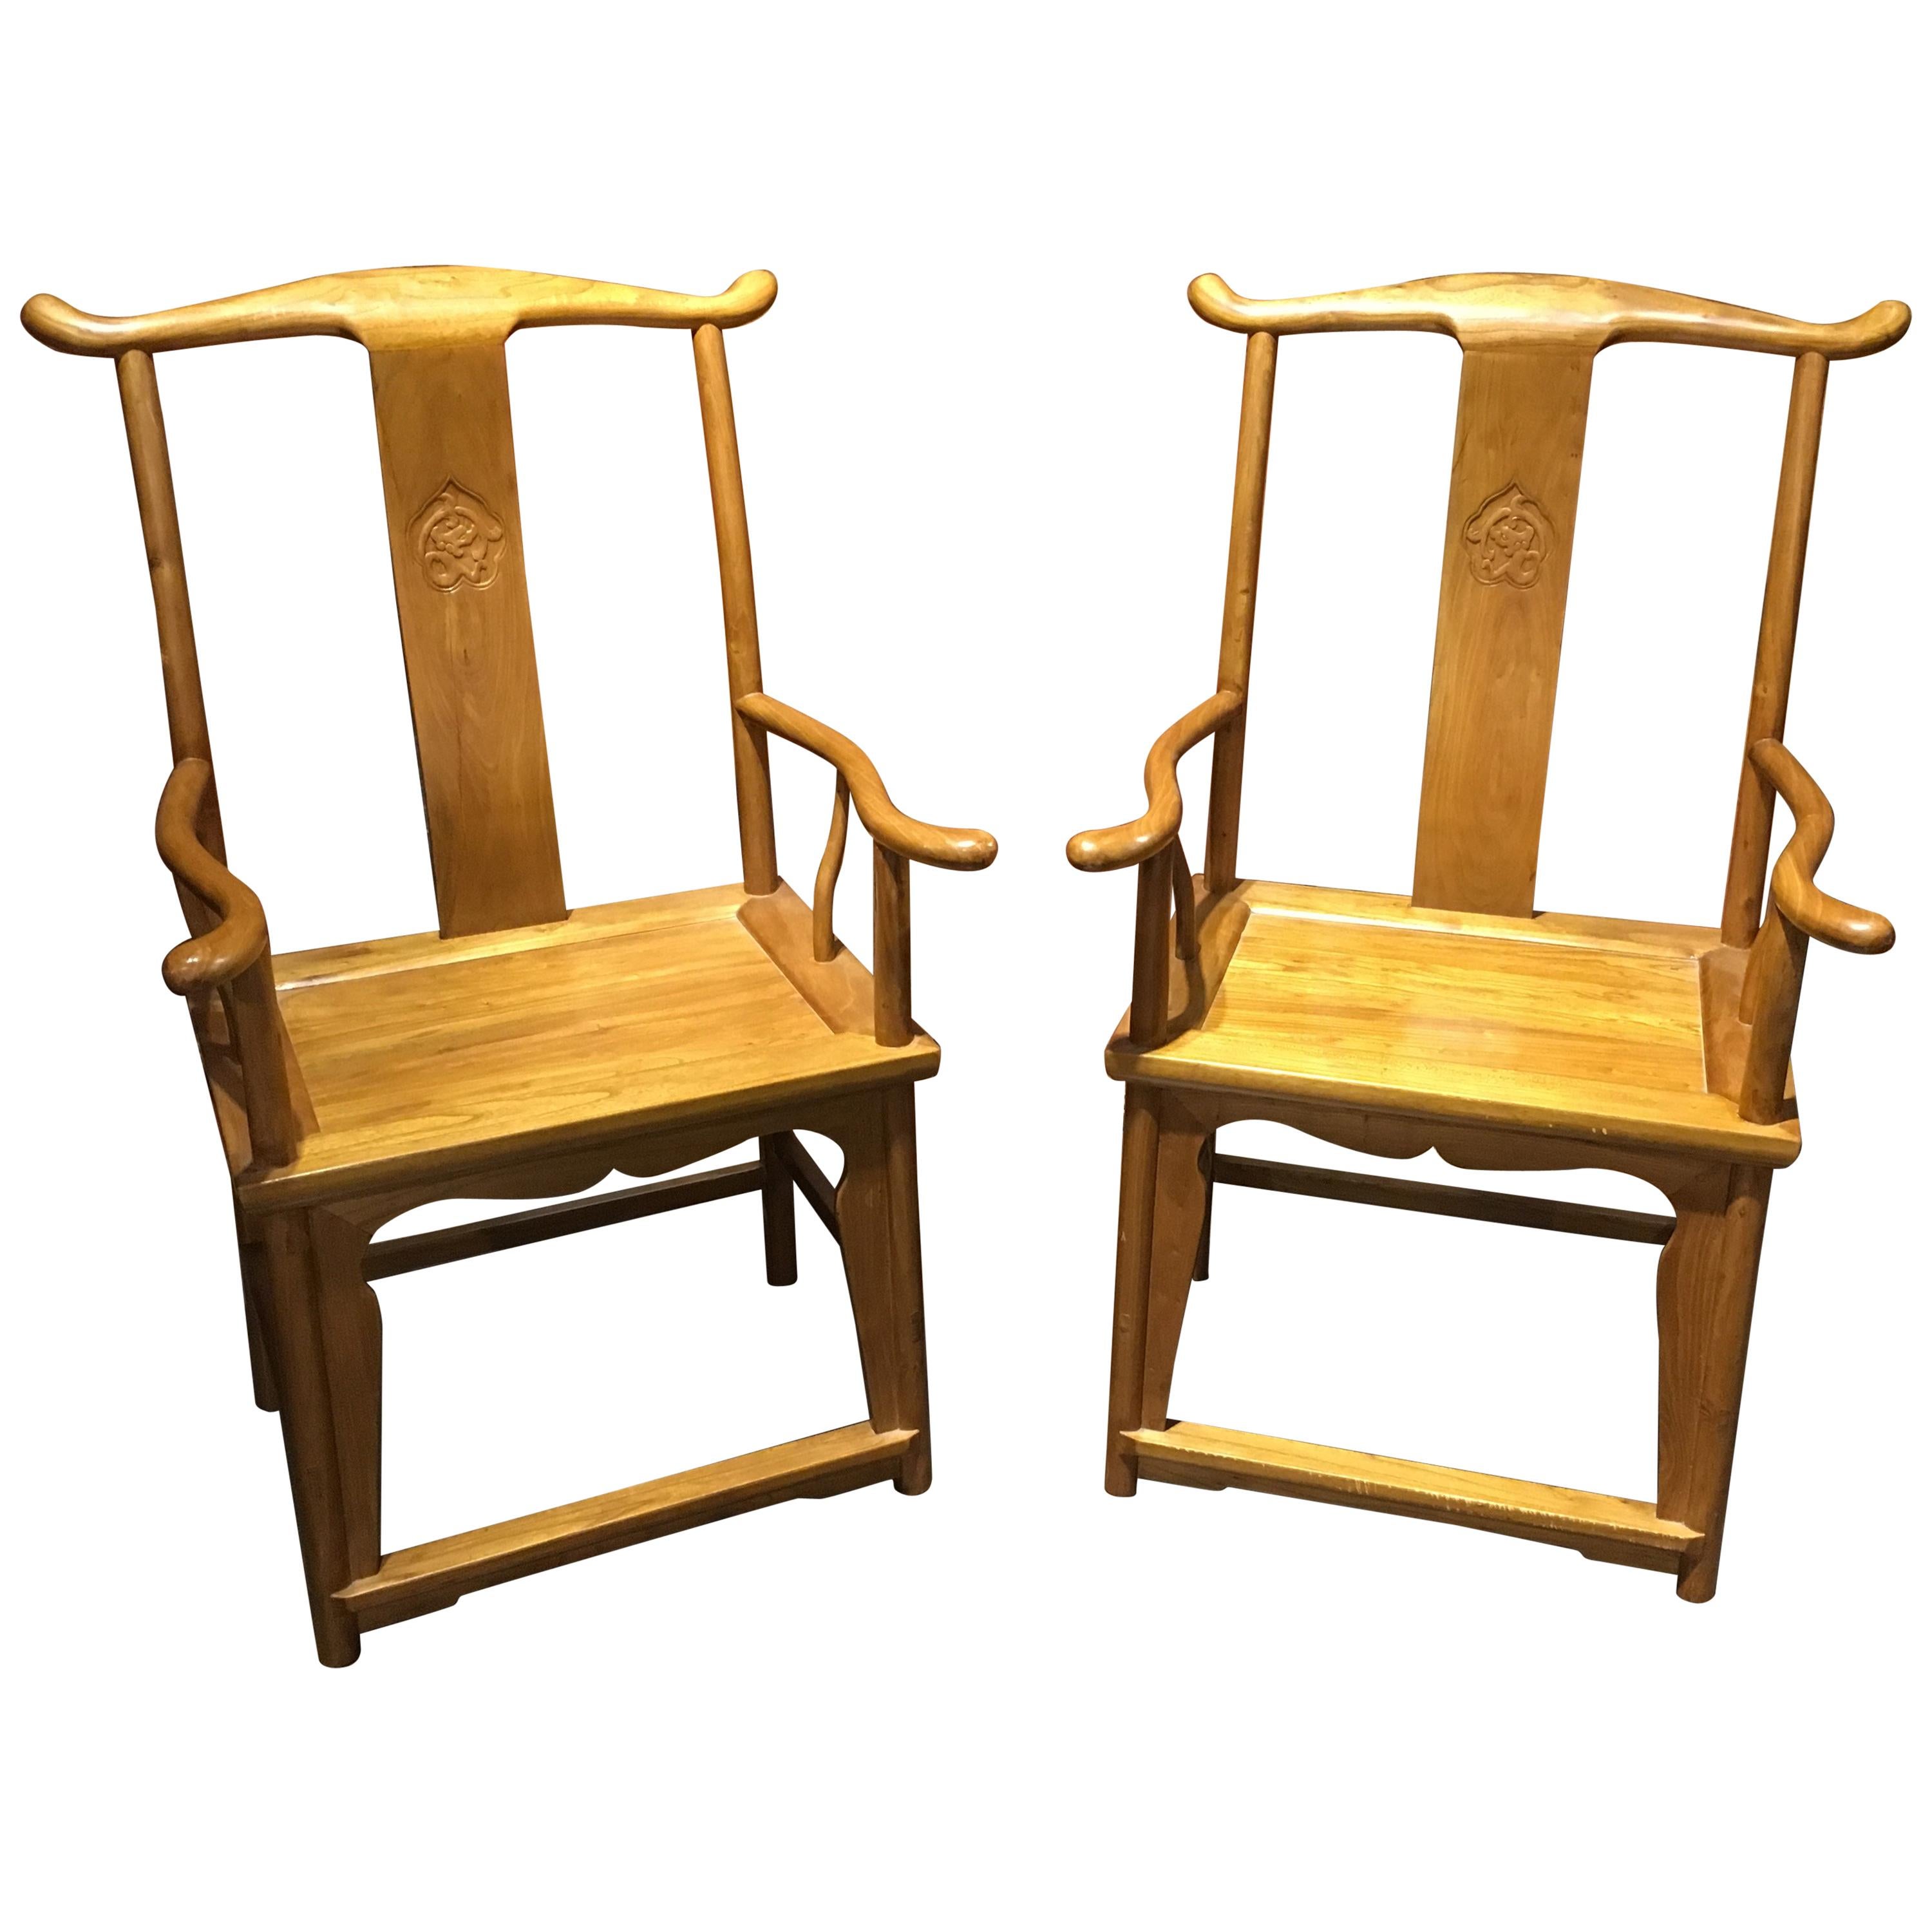 Later 20th Century Chinese Blonde Wood Official's Hat or Yoke Back Chairs, Pair